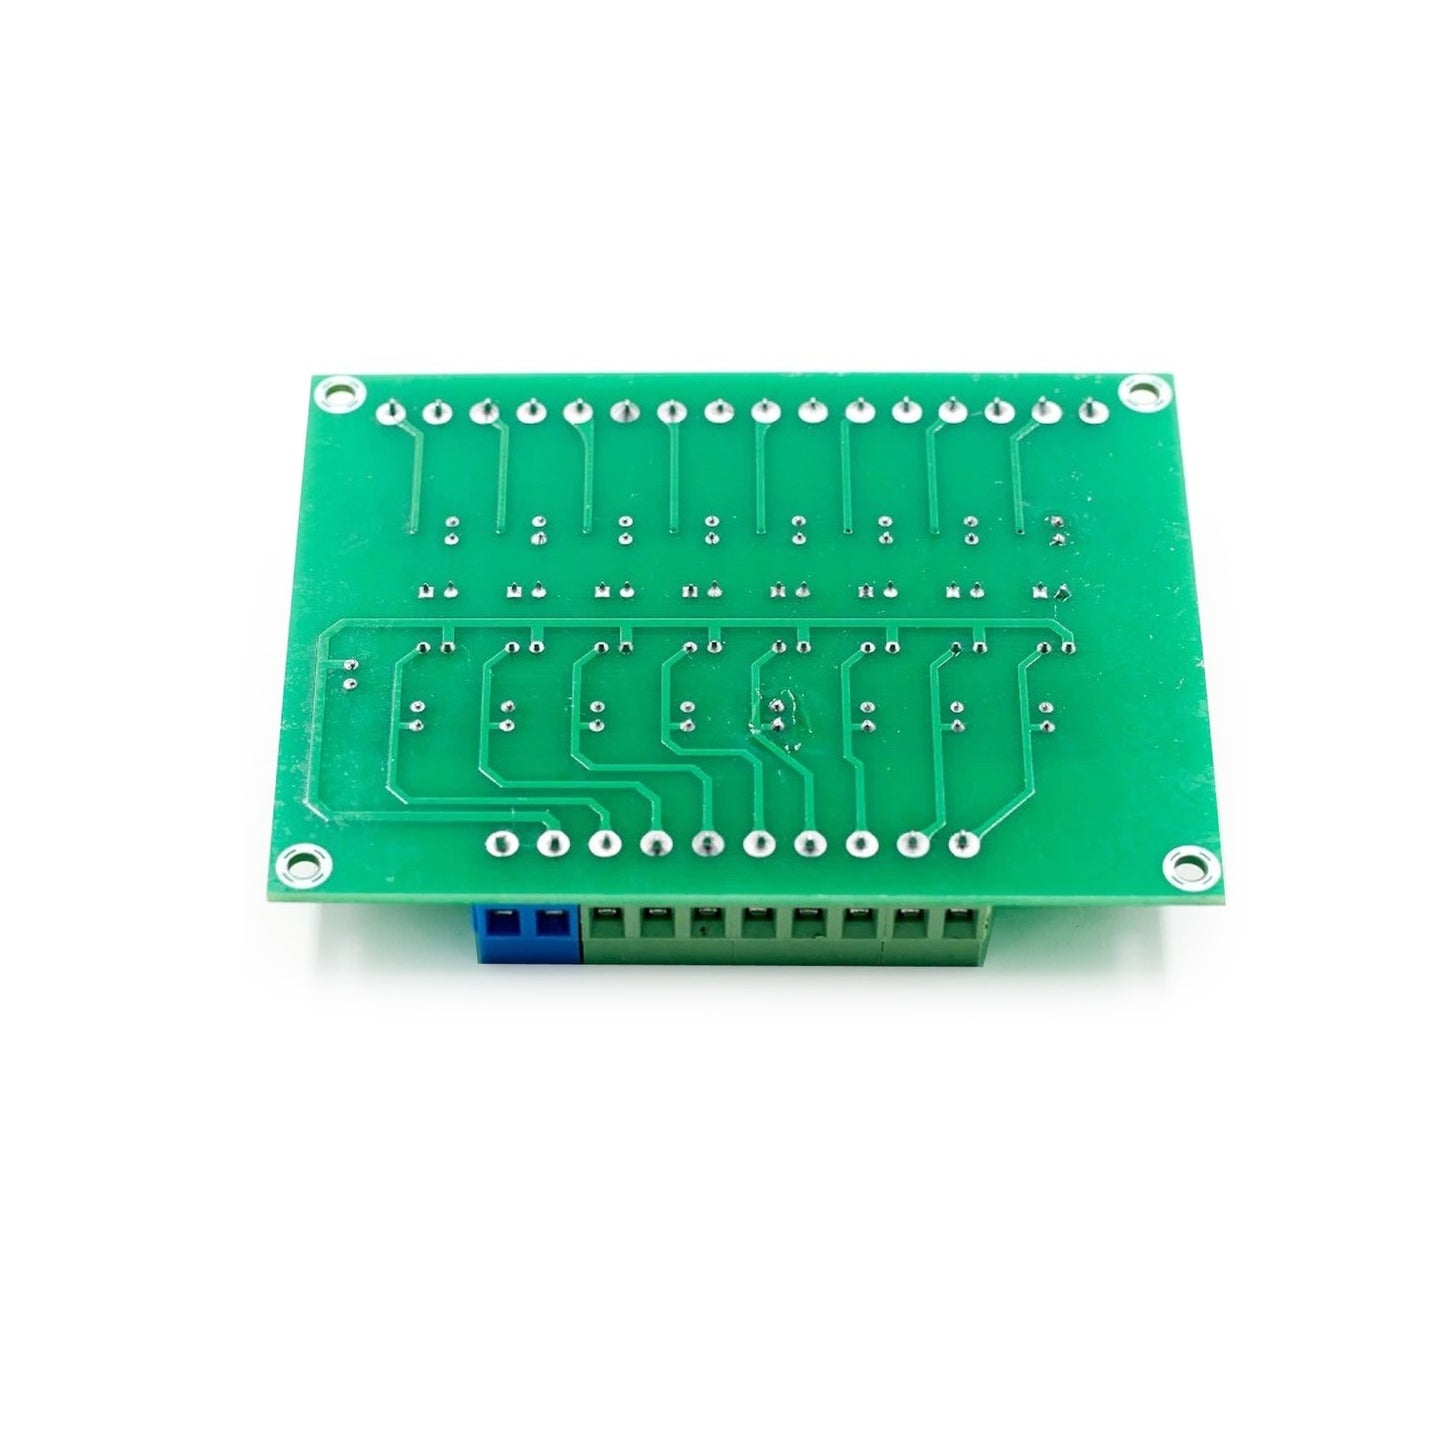 8 Channel 24V To 5V Optocoupler Isolation Module PLC Signal Level Voltage Conversion Board - RS2753 - REES52